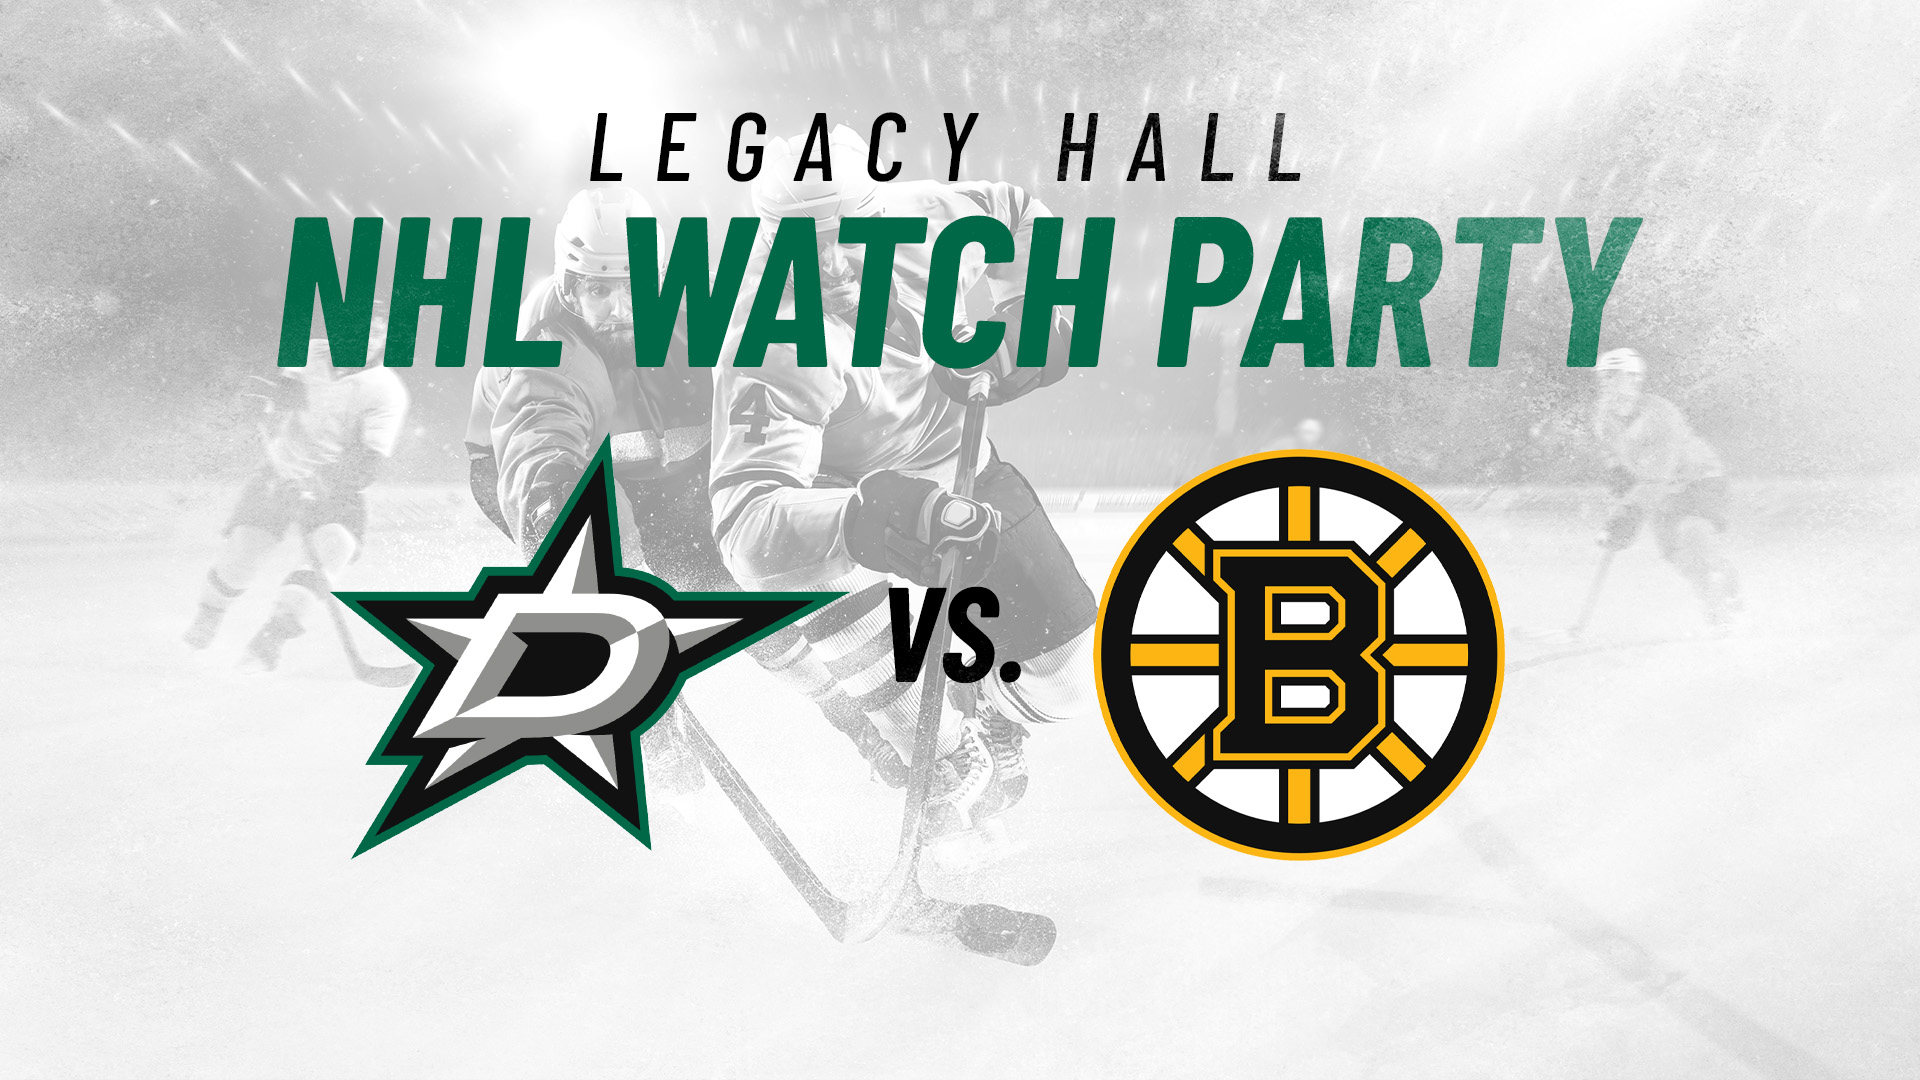 Stars vs Bruins Watch Party